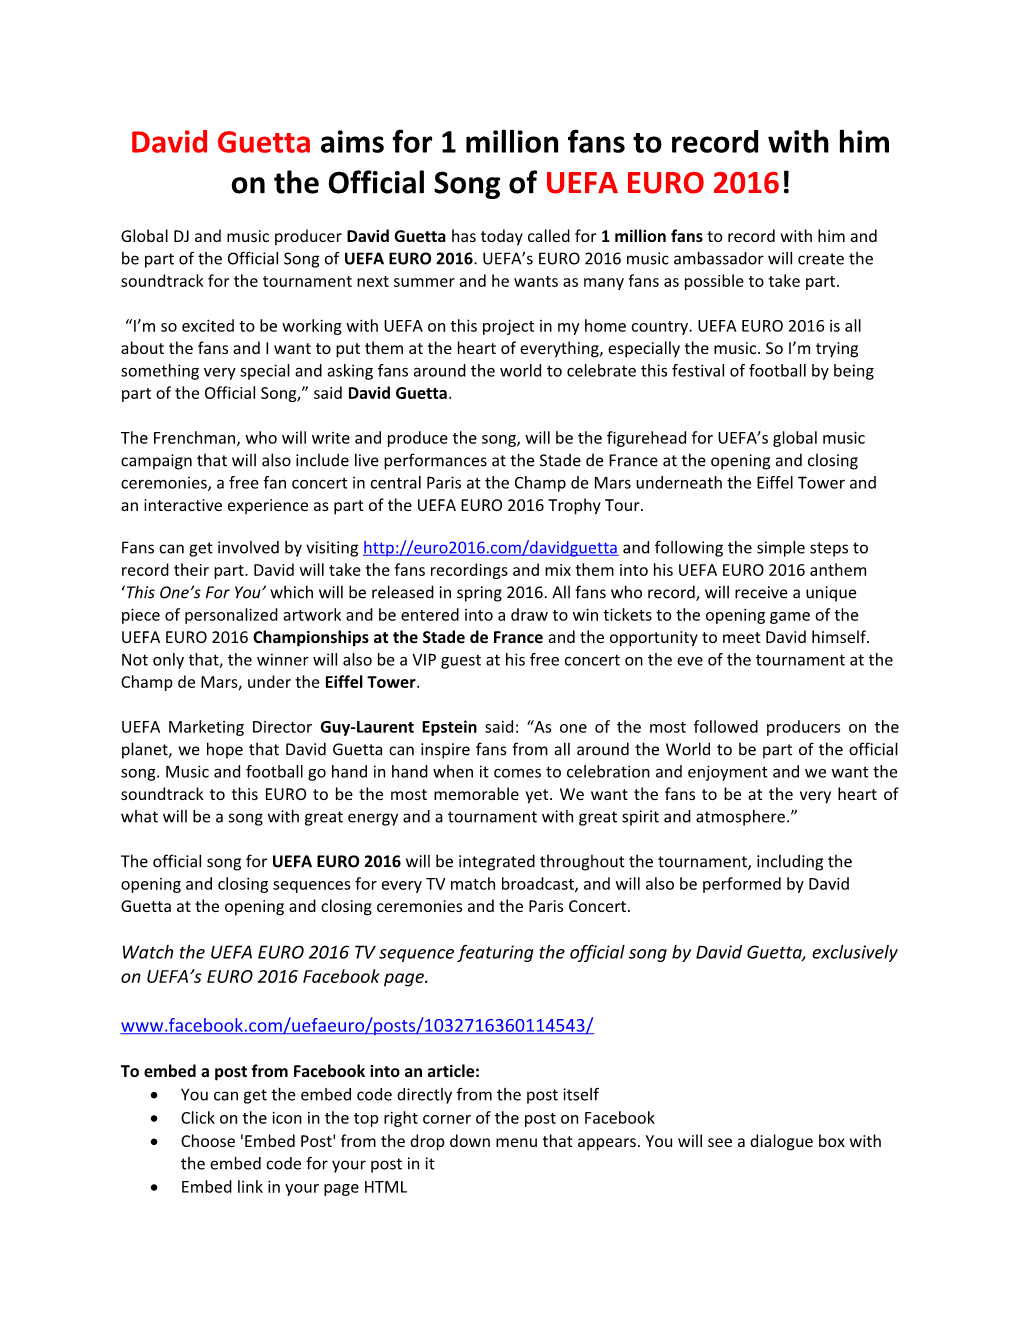 David Guetta Aims for 1 Million Fans to Record with Him on the Official Song of UEFA EURO